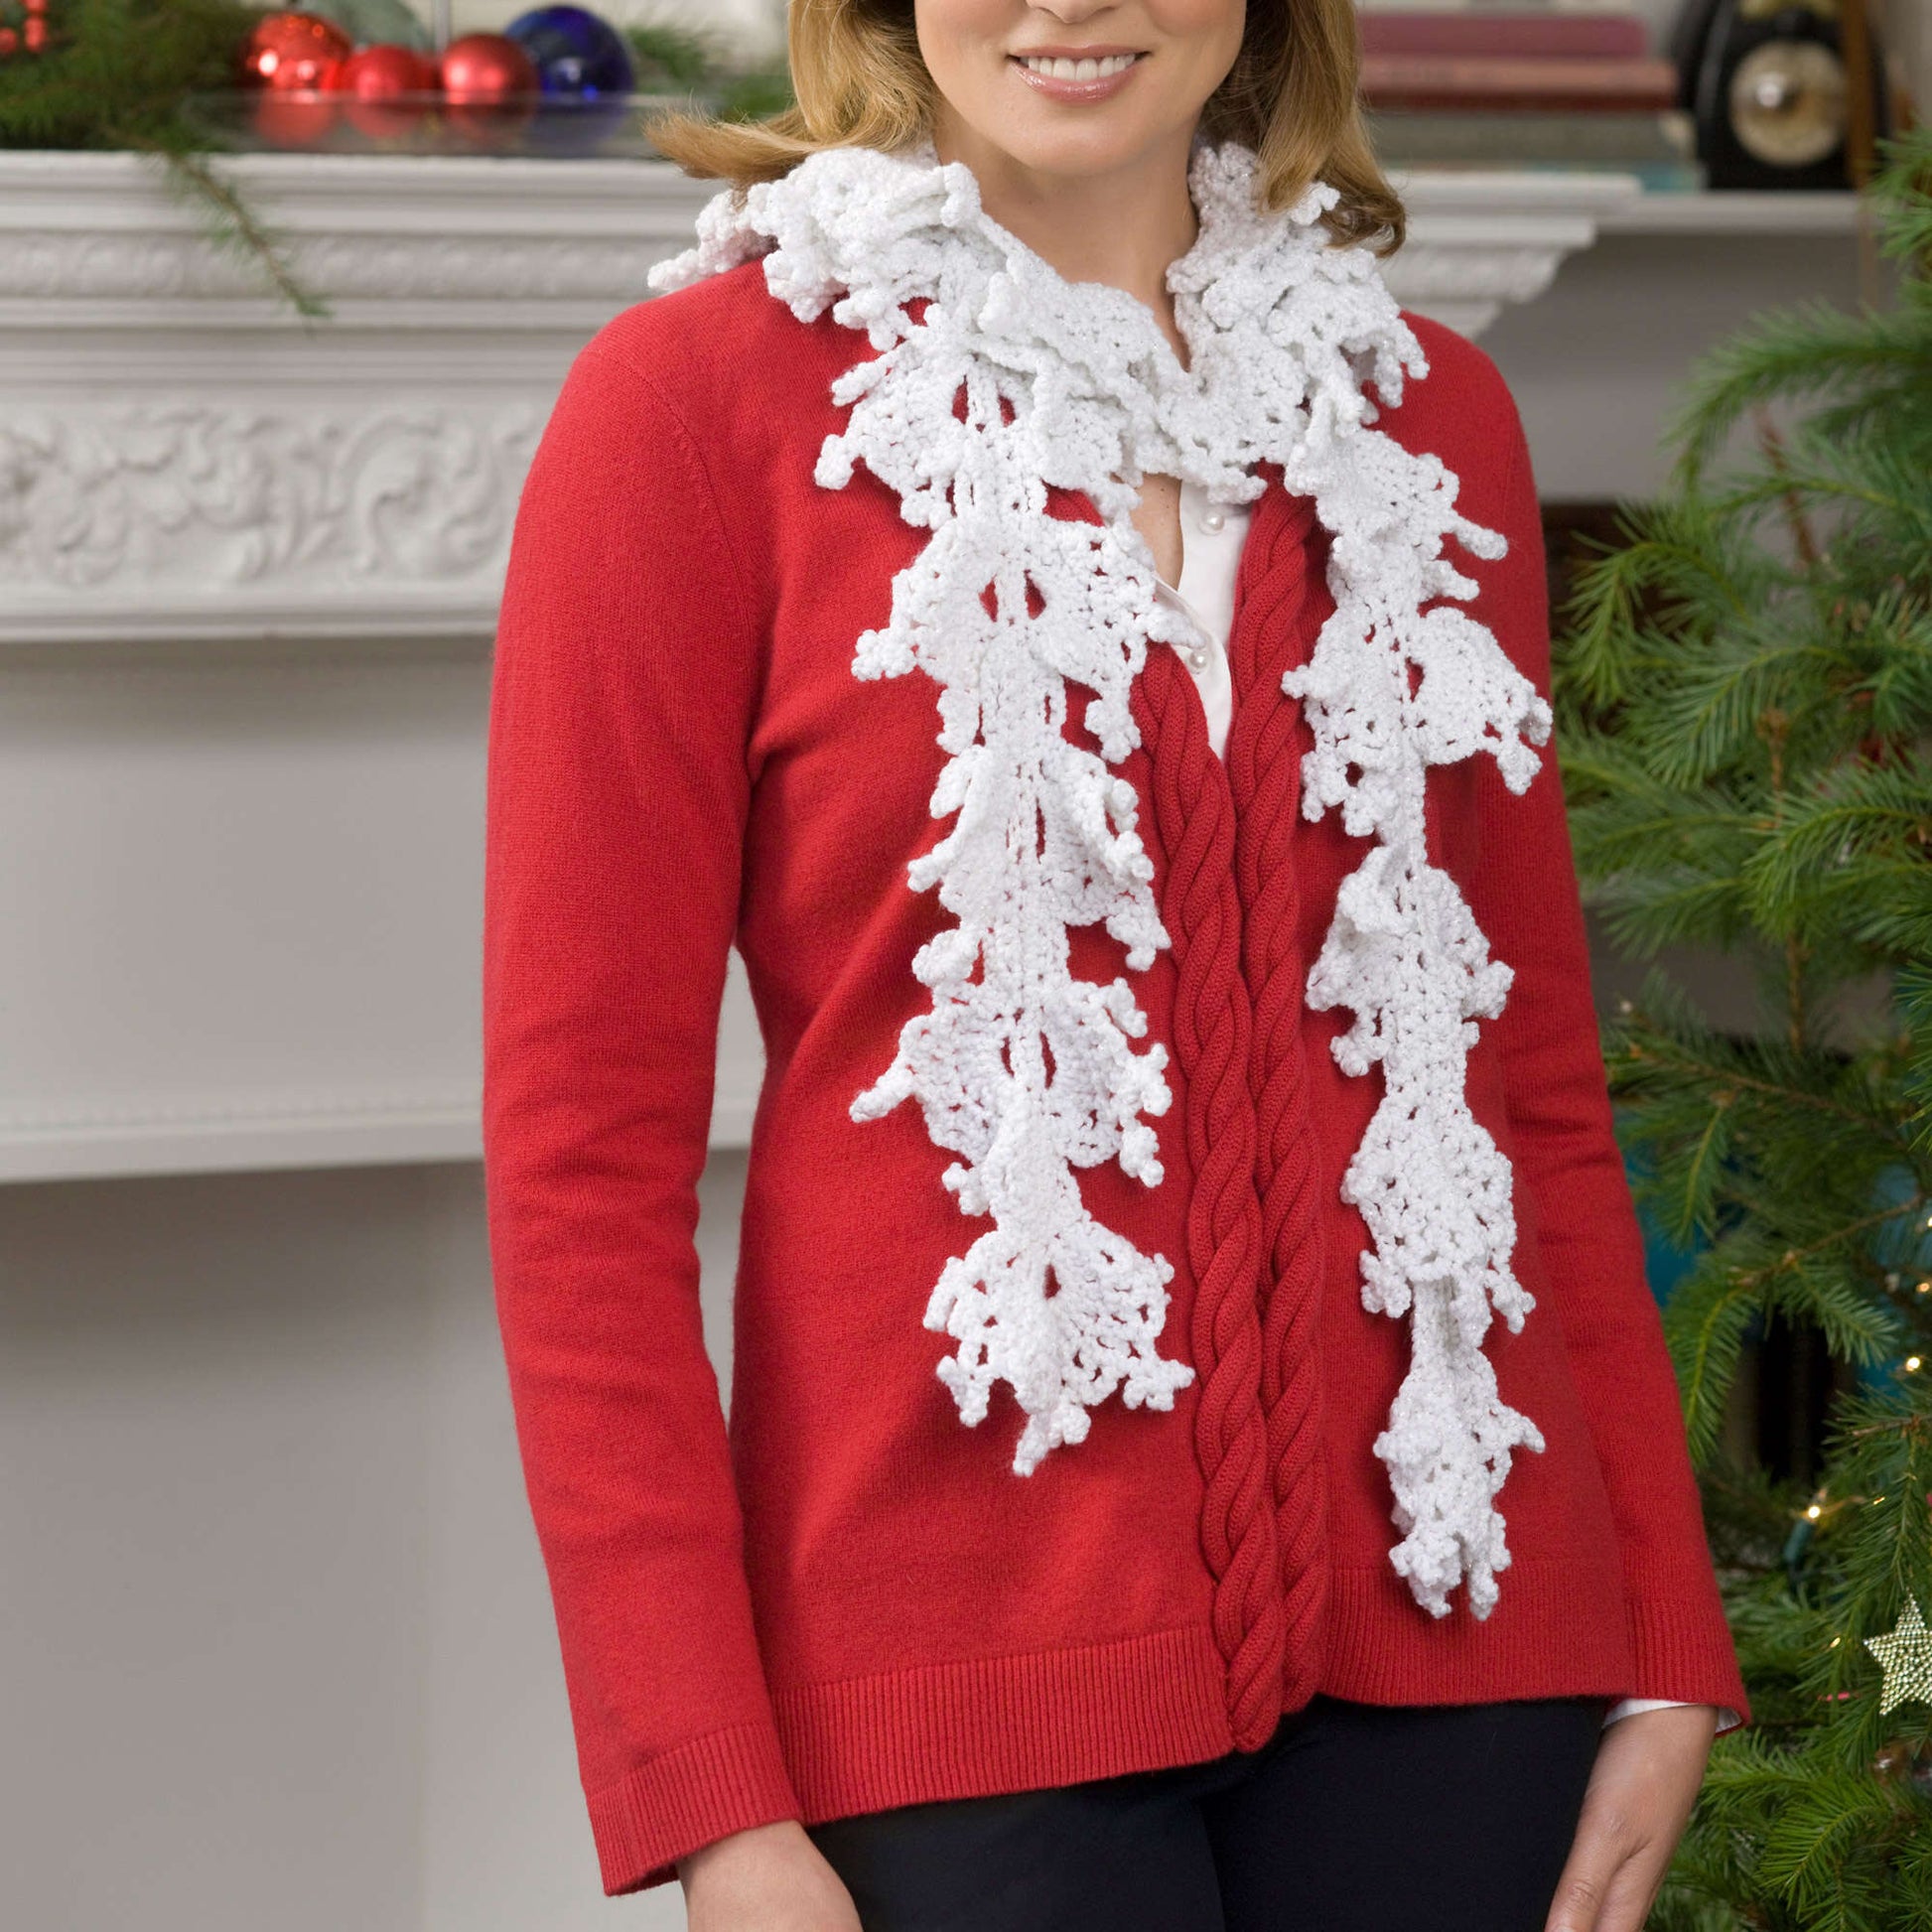 Free Red Heart Falling Snowflakes Crochet Scarf Pattern